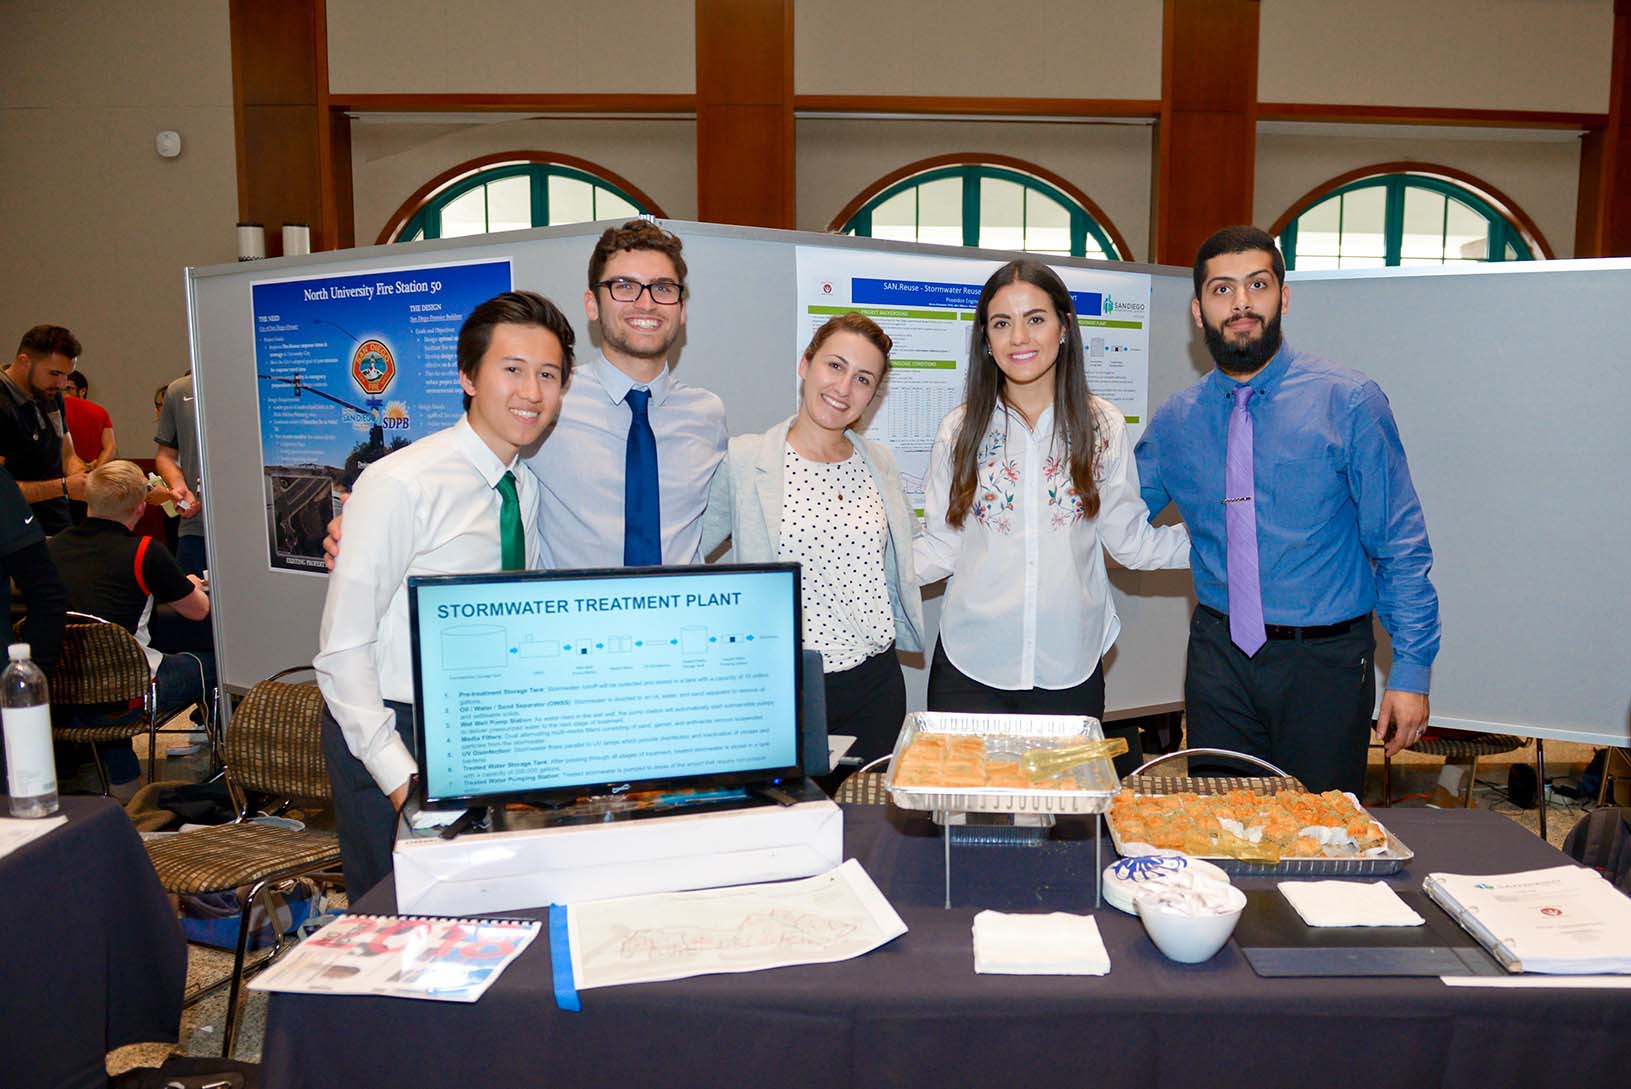 Engineering students presenting their project at Design Day